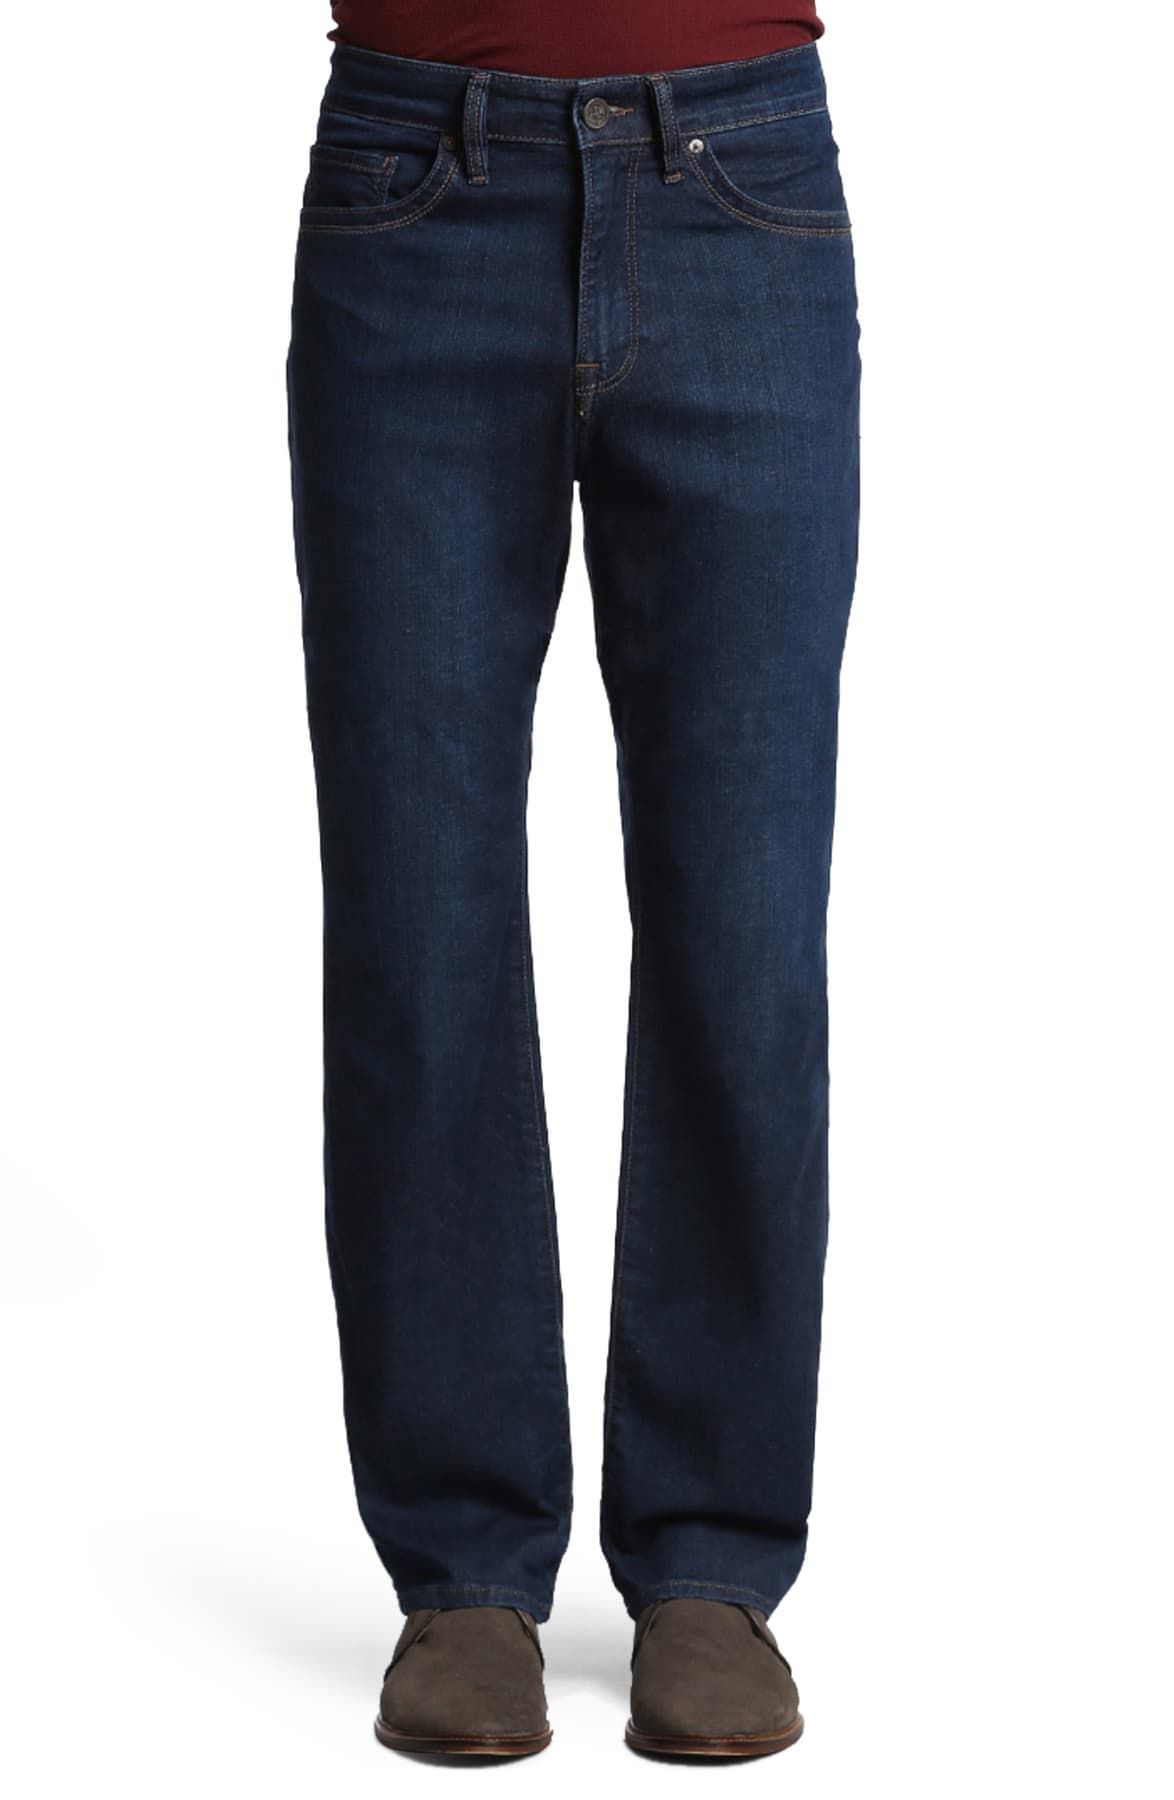 Charisma Relaxed Fit Jeans 34 Heritage